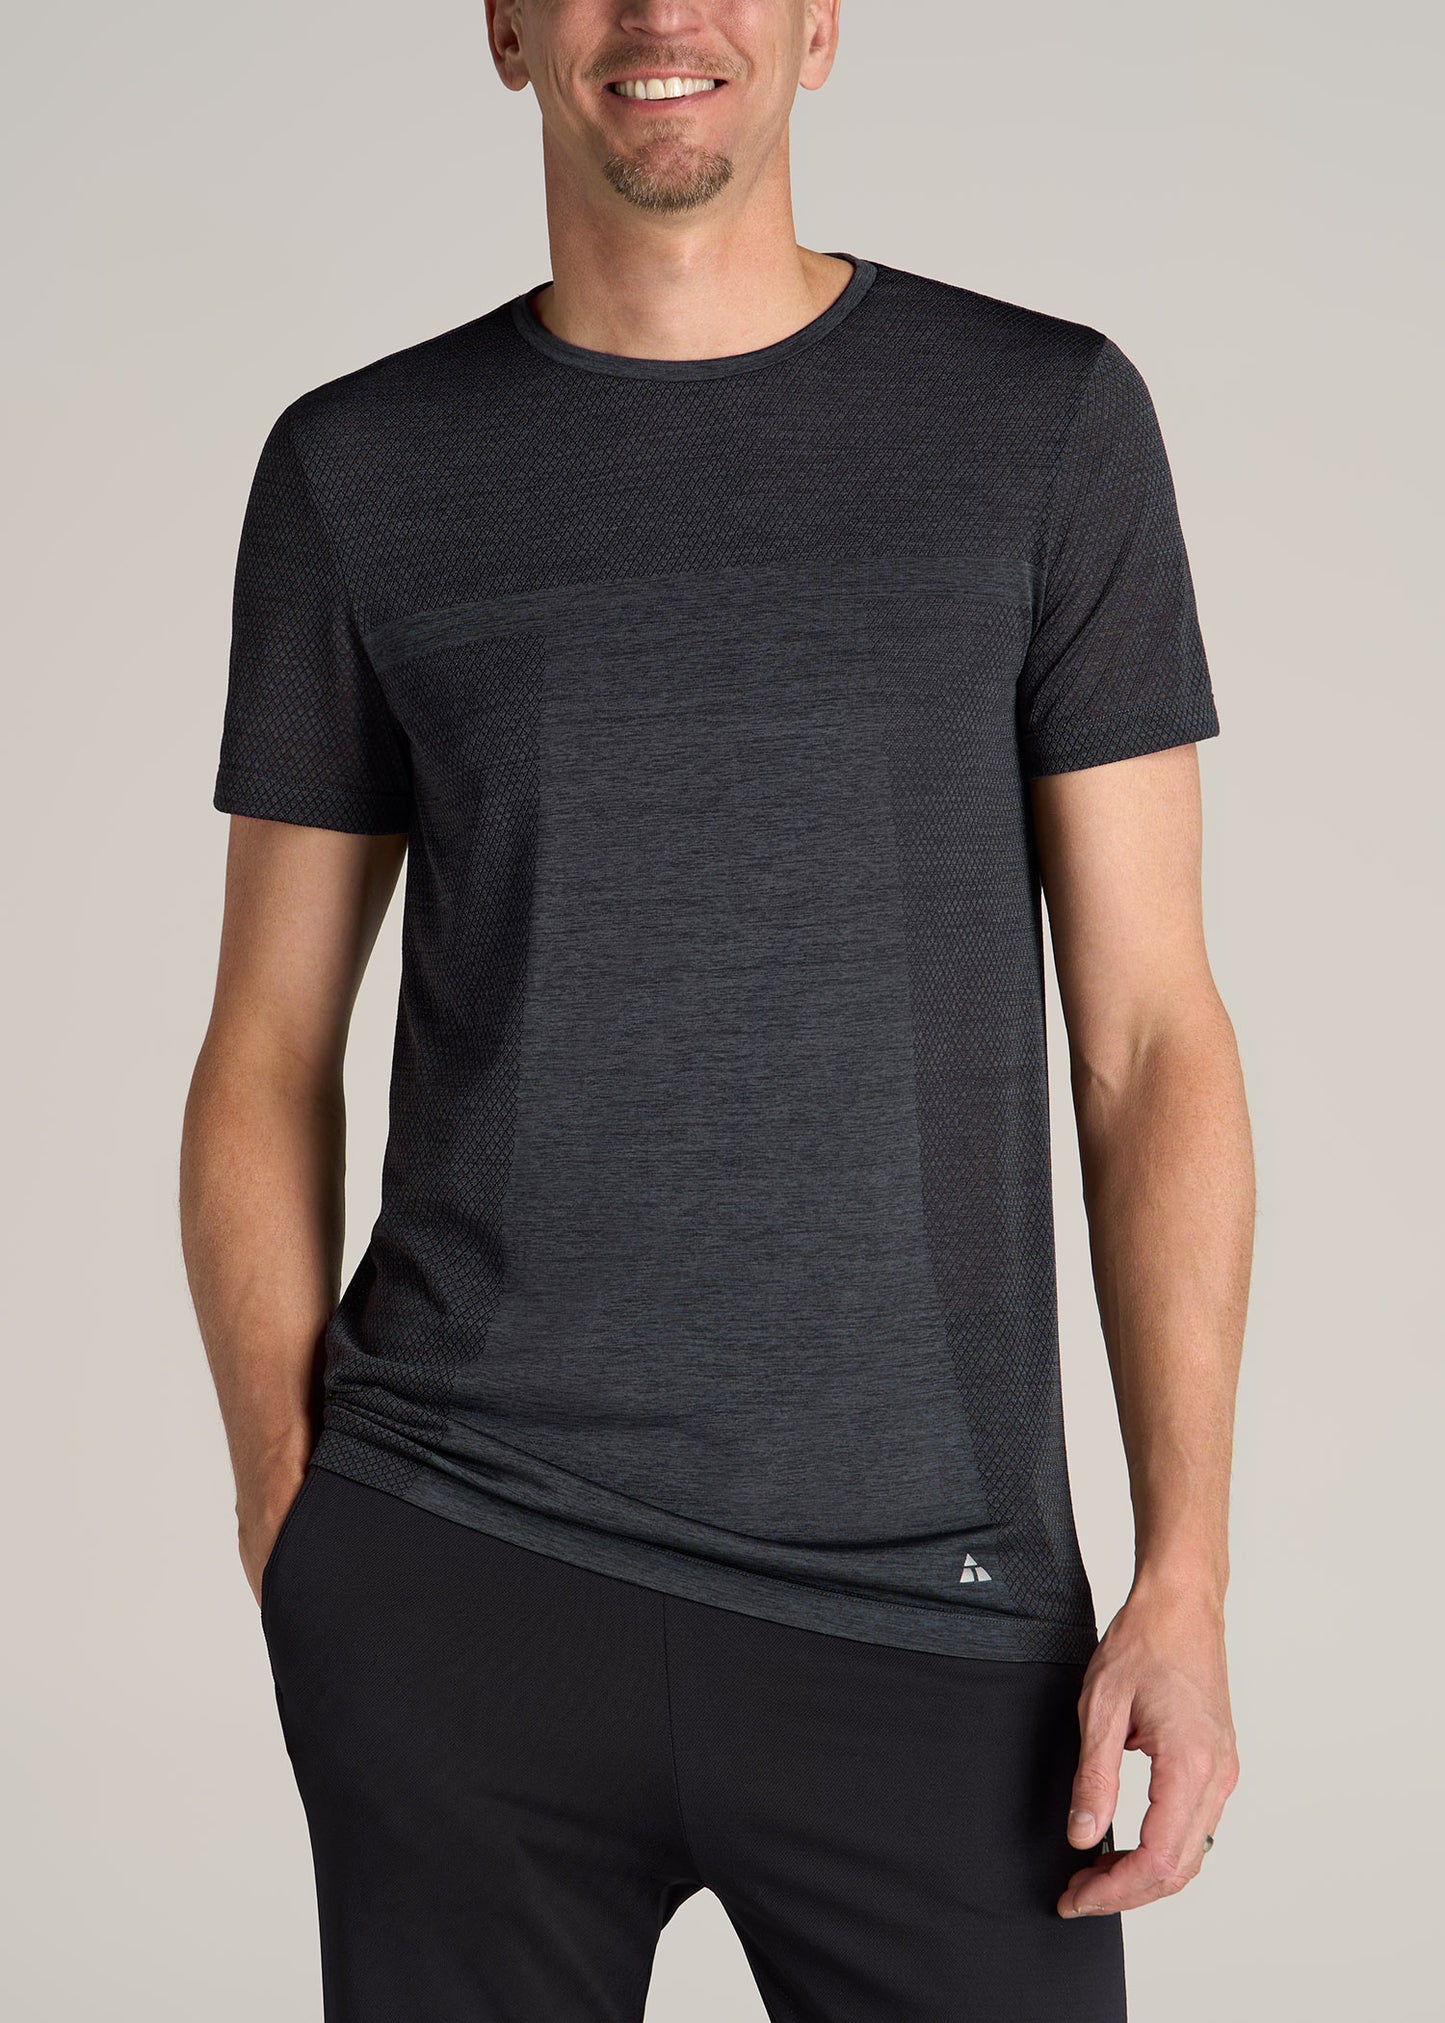 A tall man wearing American Tall's A.T. Performance MODERN-FIT Engineered Athletic Tall Tee in Charcoal Mix.